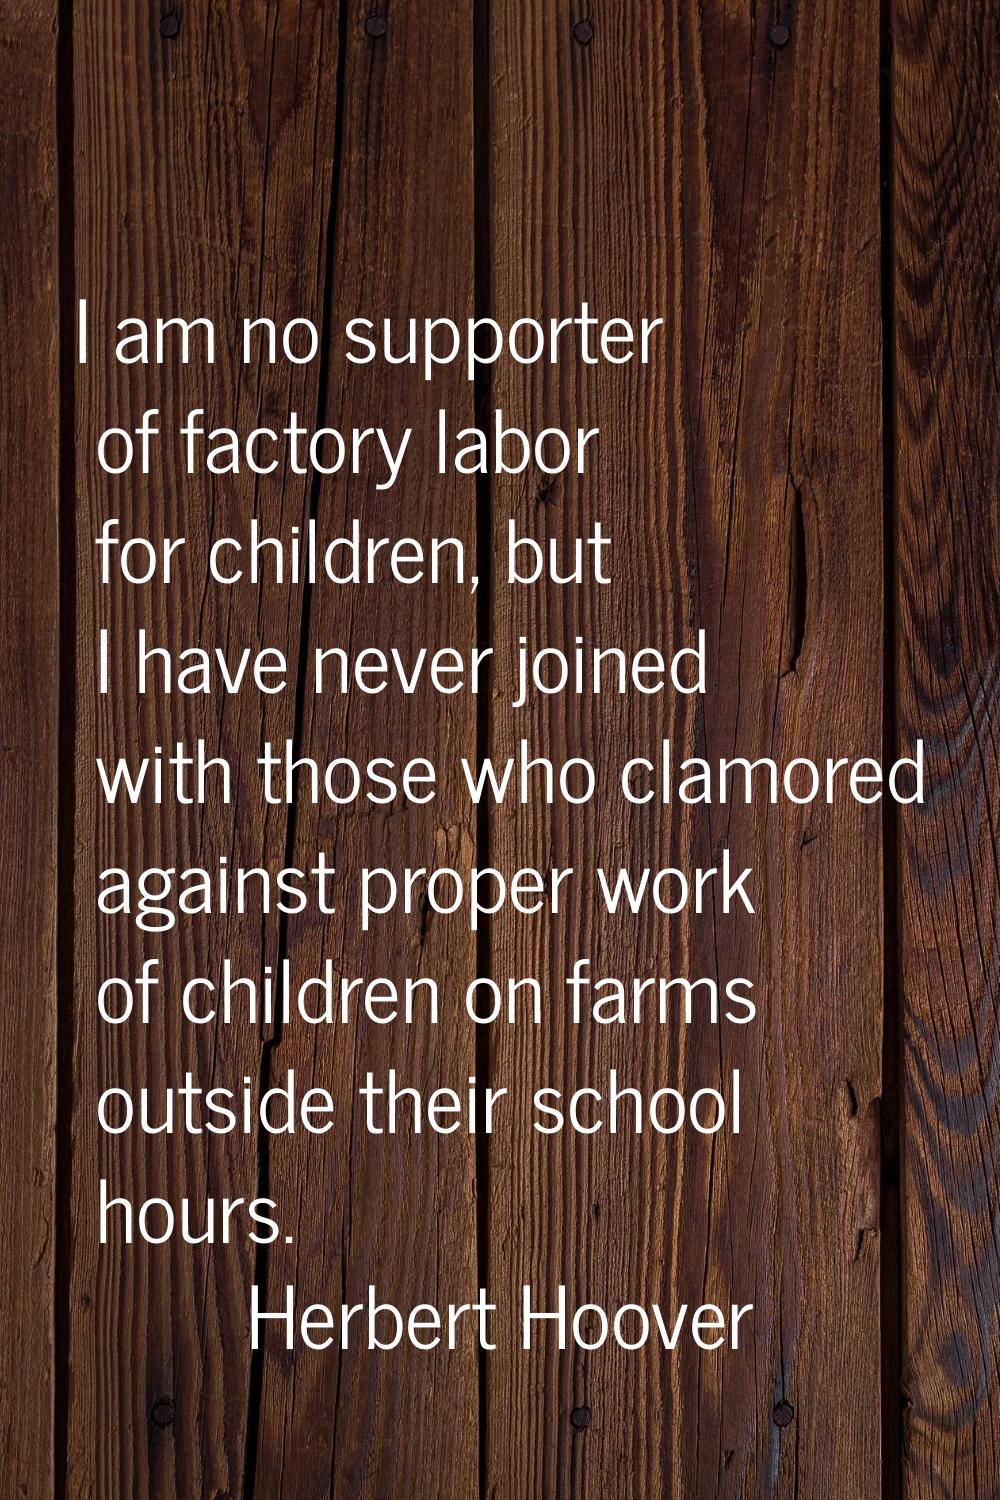 I am no supporter of factory labor for children, but I have never joined with those who clamored ag